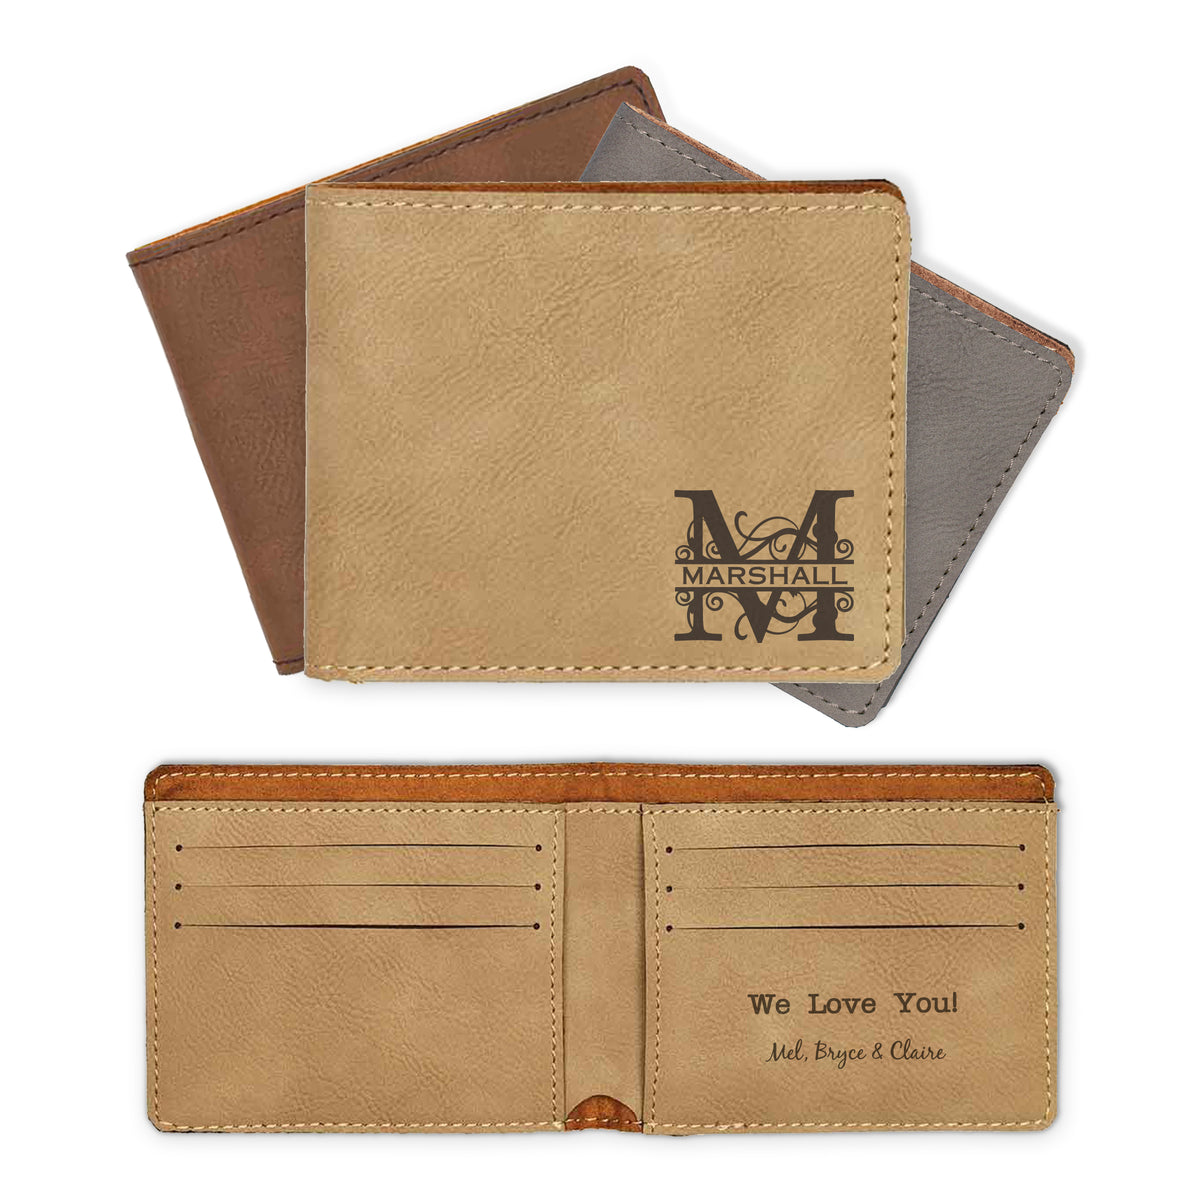 Personalized Wallet, Engraved leather wallet, Gift for him, Men's wallet /Laser engraved  Leather wallet, Engraved wallet